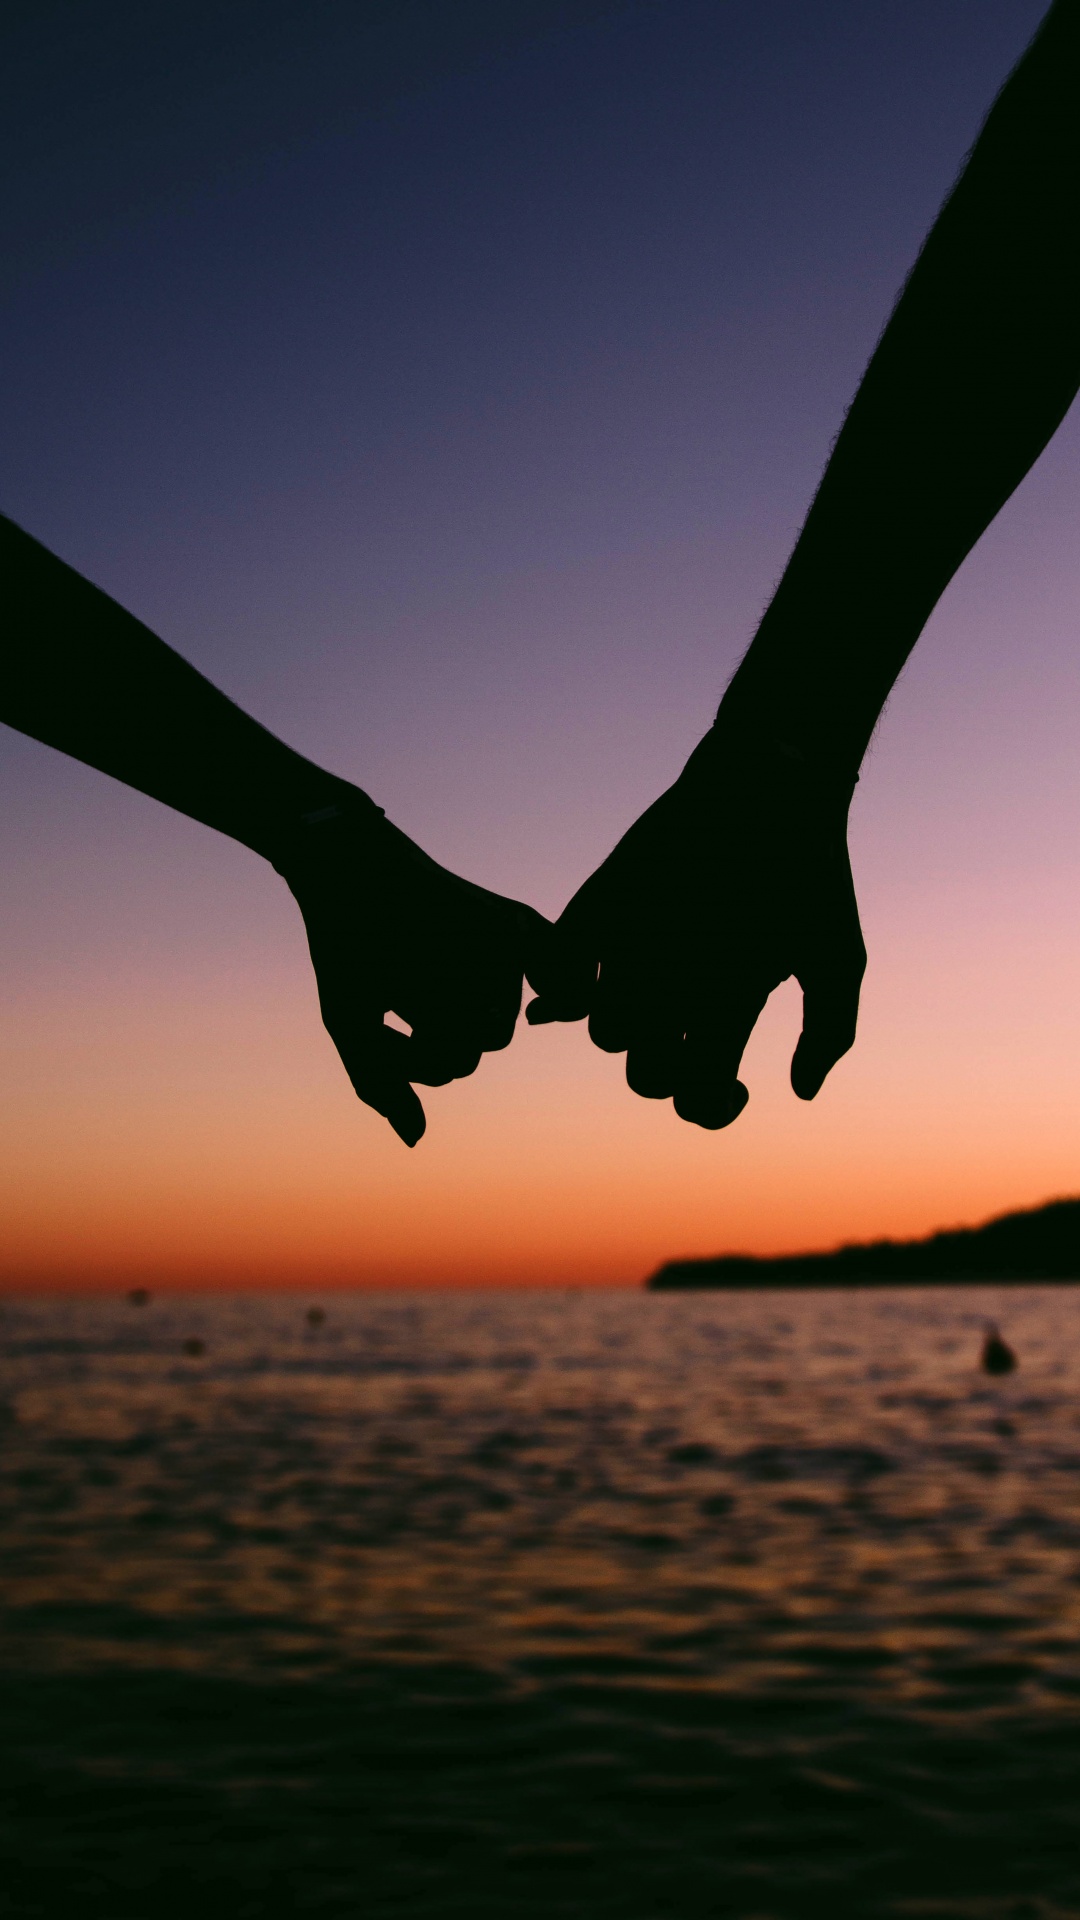 Hands t   ogether Wallpaper 4K, Couple, Silhouette, Sunset